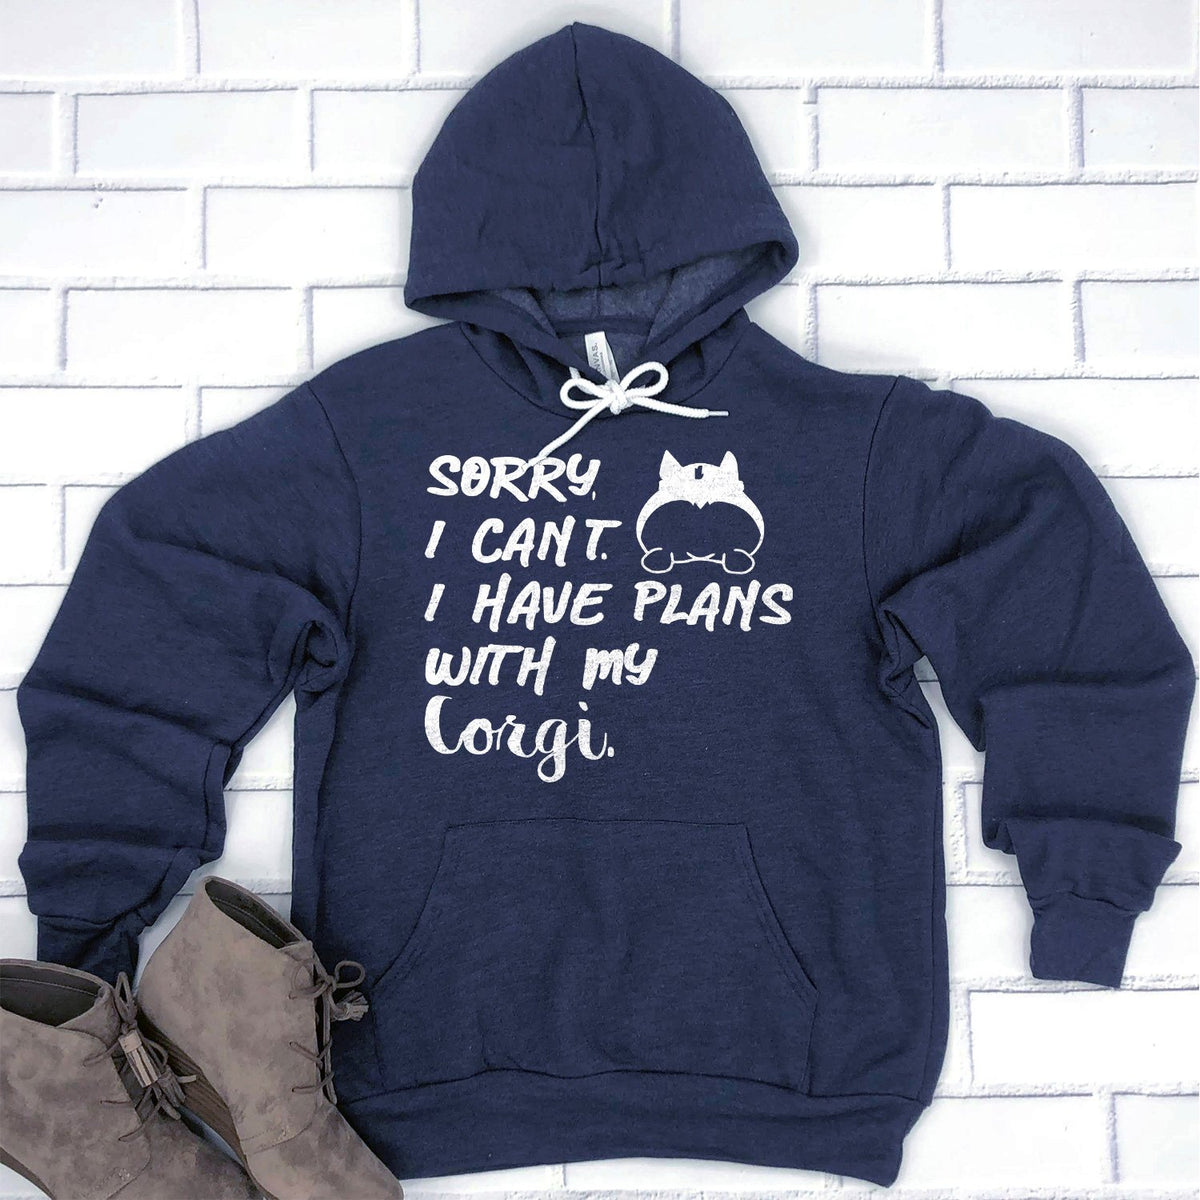 Sorry I Can&#39;t I Have Plans with My Corgi - Hoodie Sweatshirt